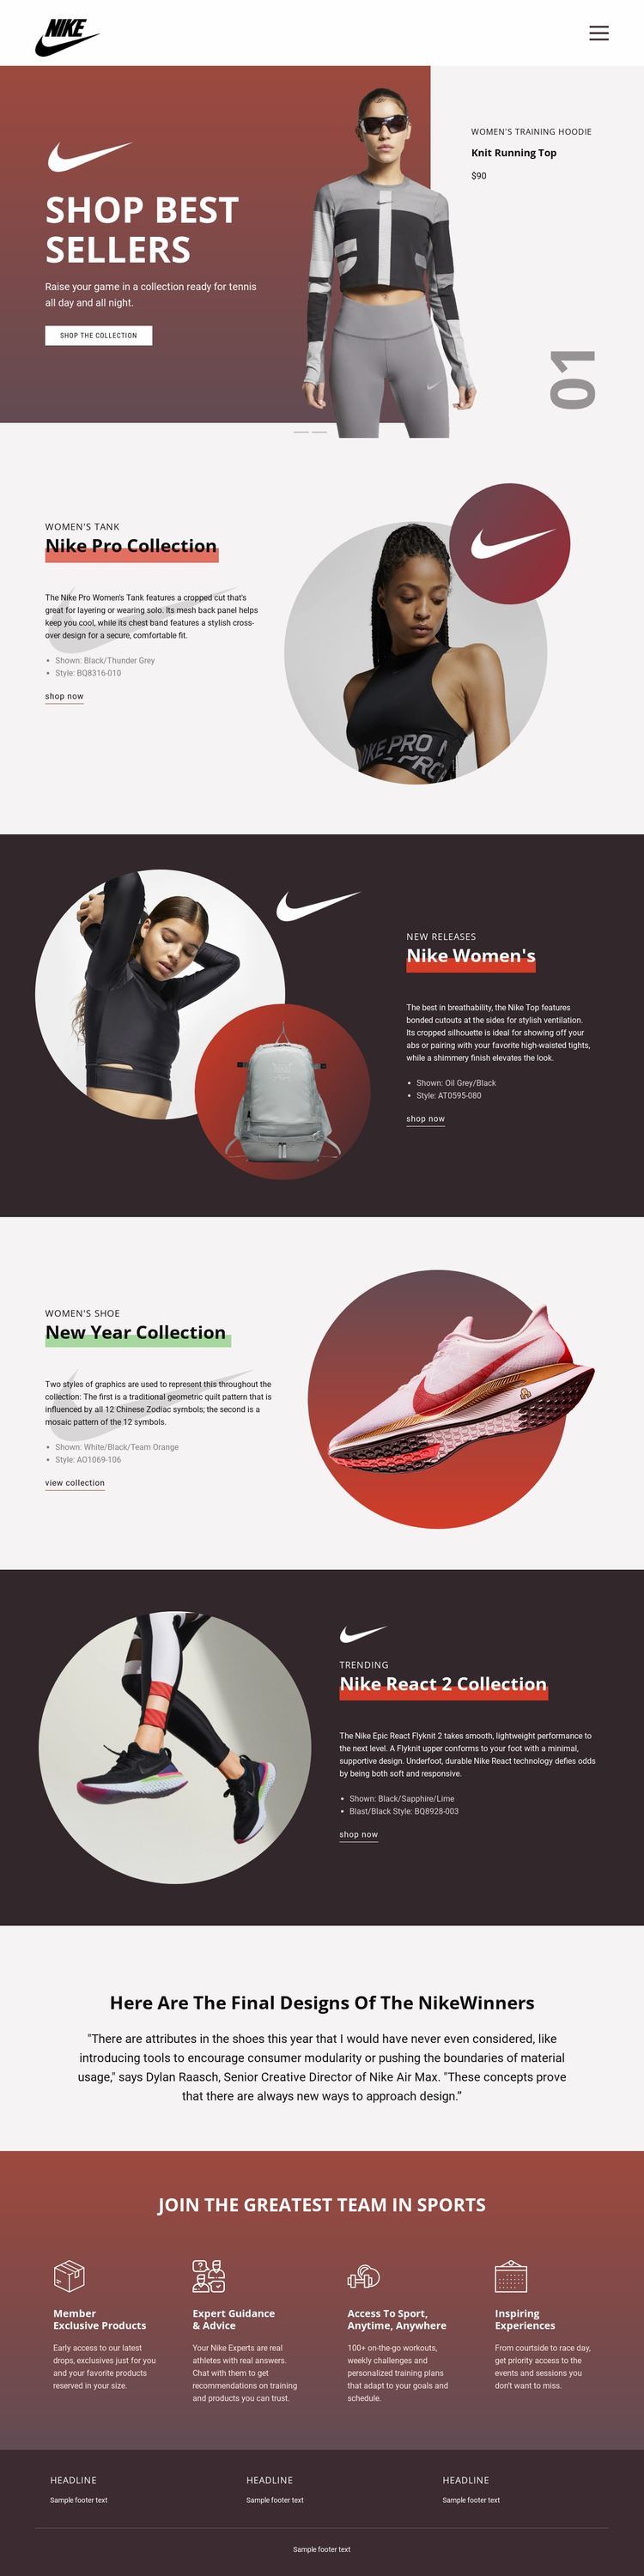 Best sellers for sports Website Template